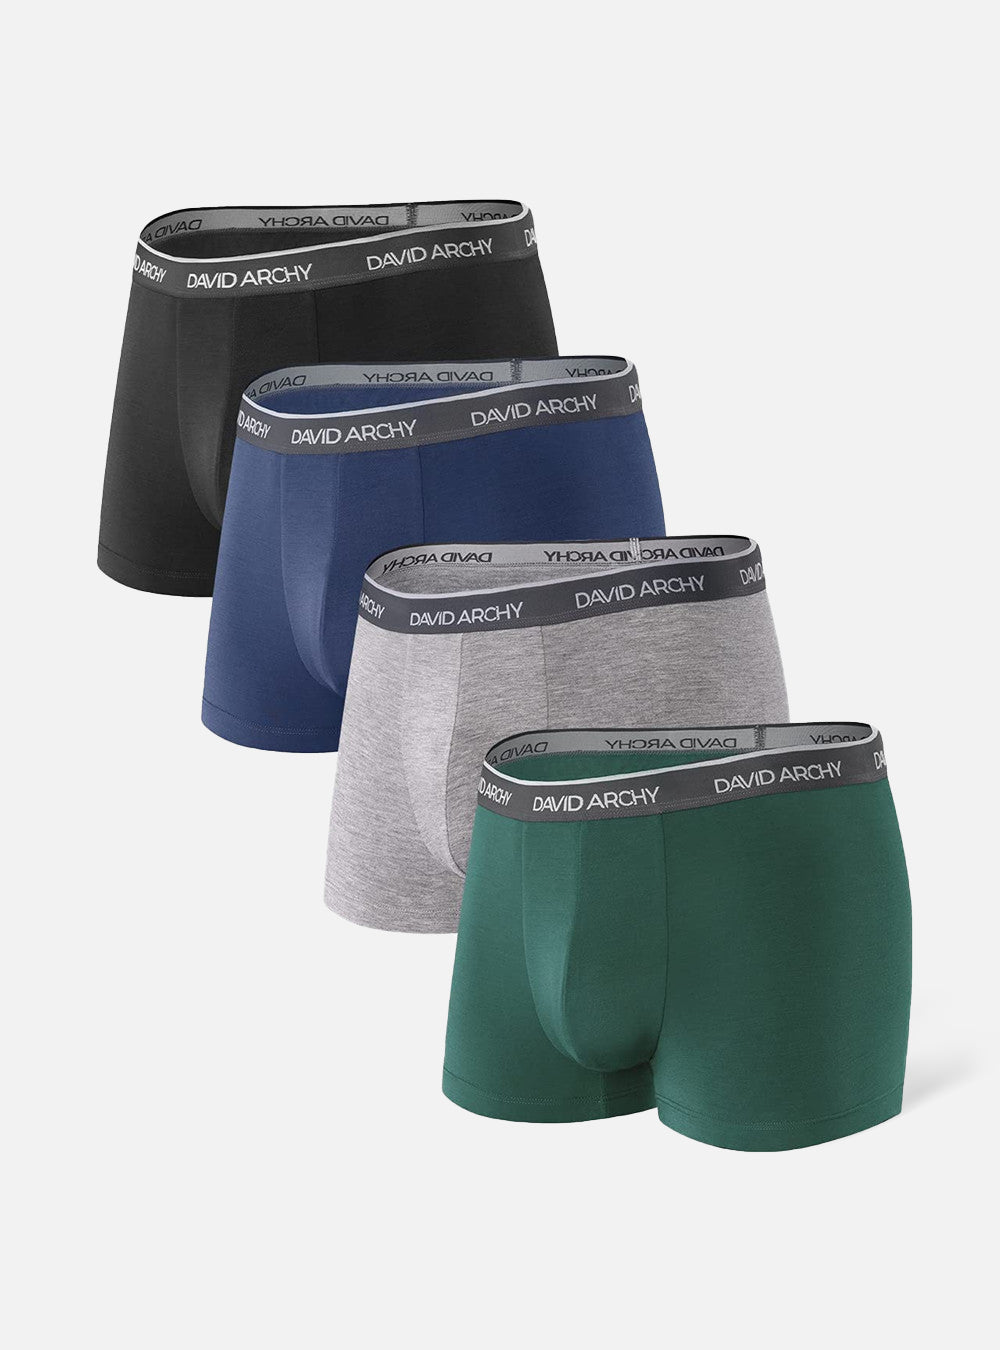 David Archy 3 Packs Trunks With Pouch Blend Modal And The Most